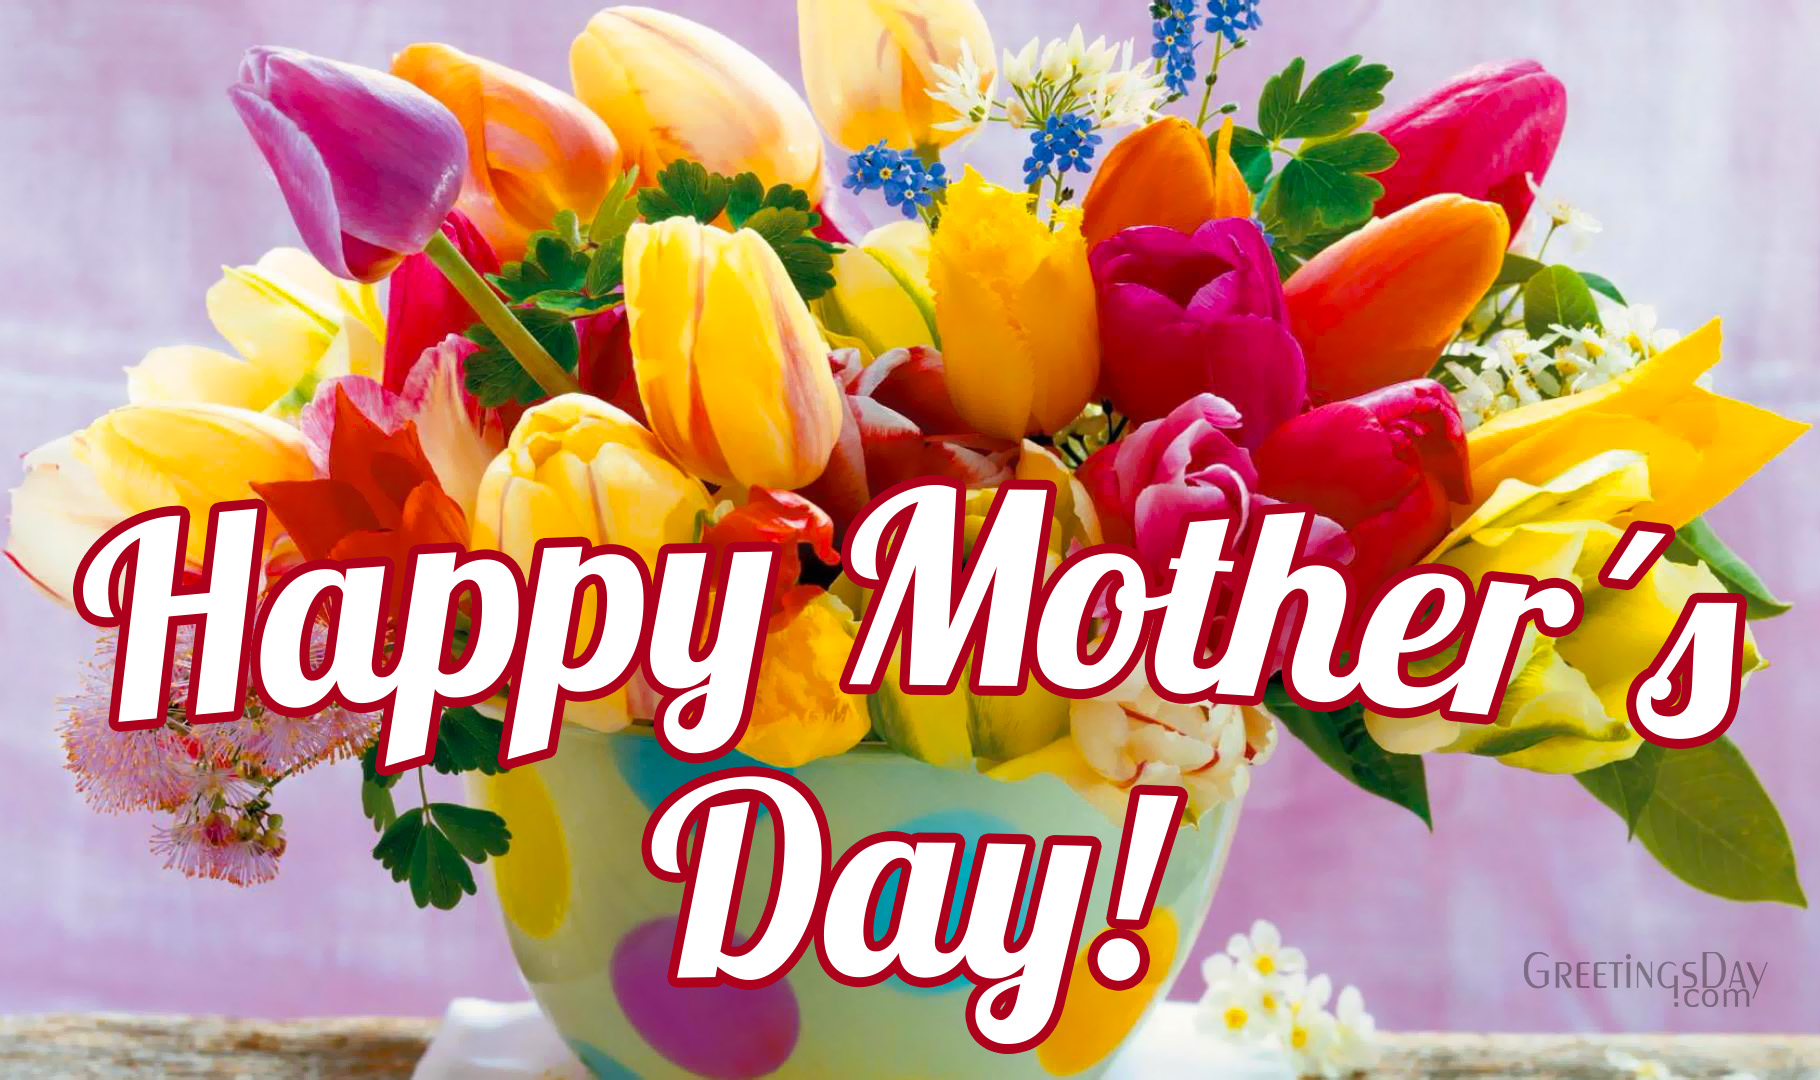 Happy Mother's Day Online Cards, Photos and Wishes.